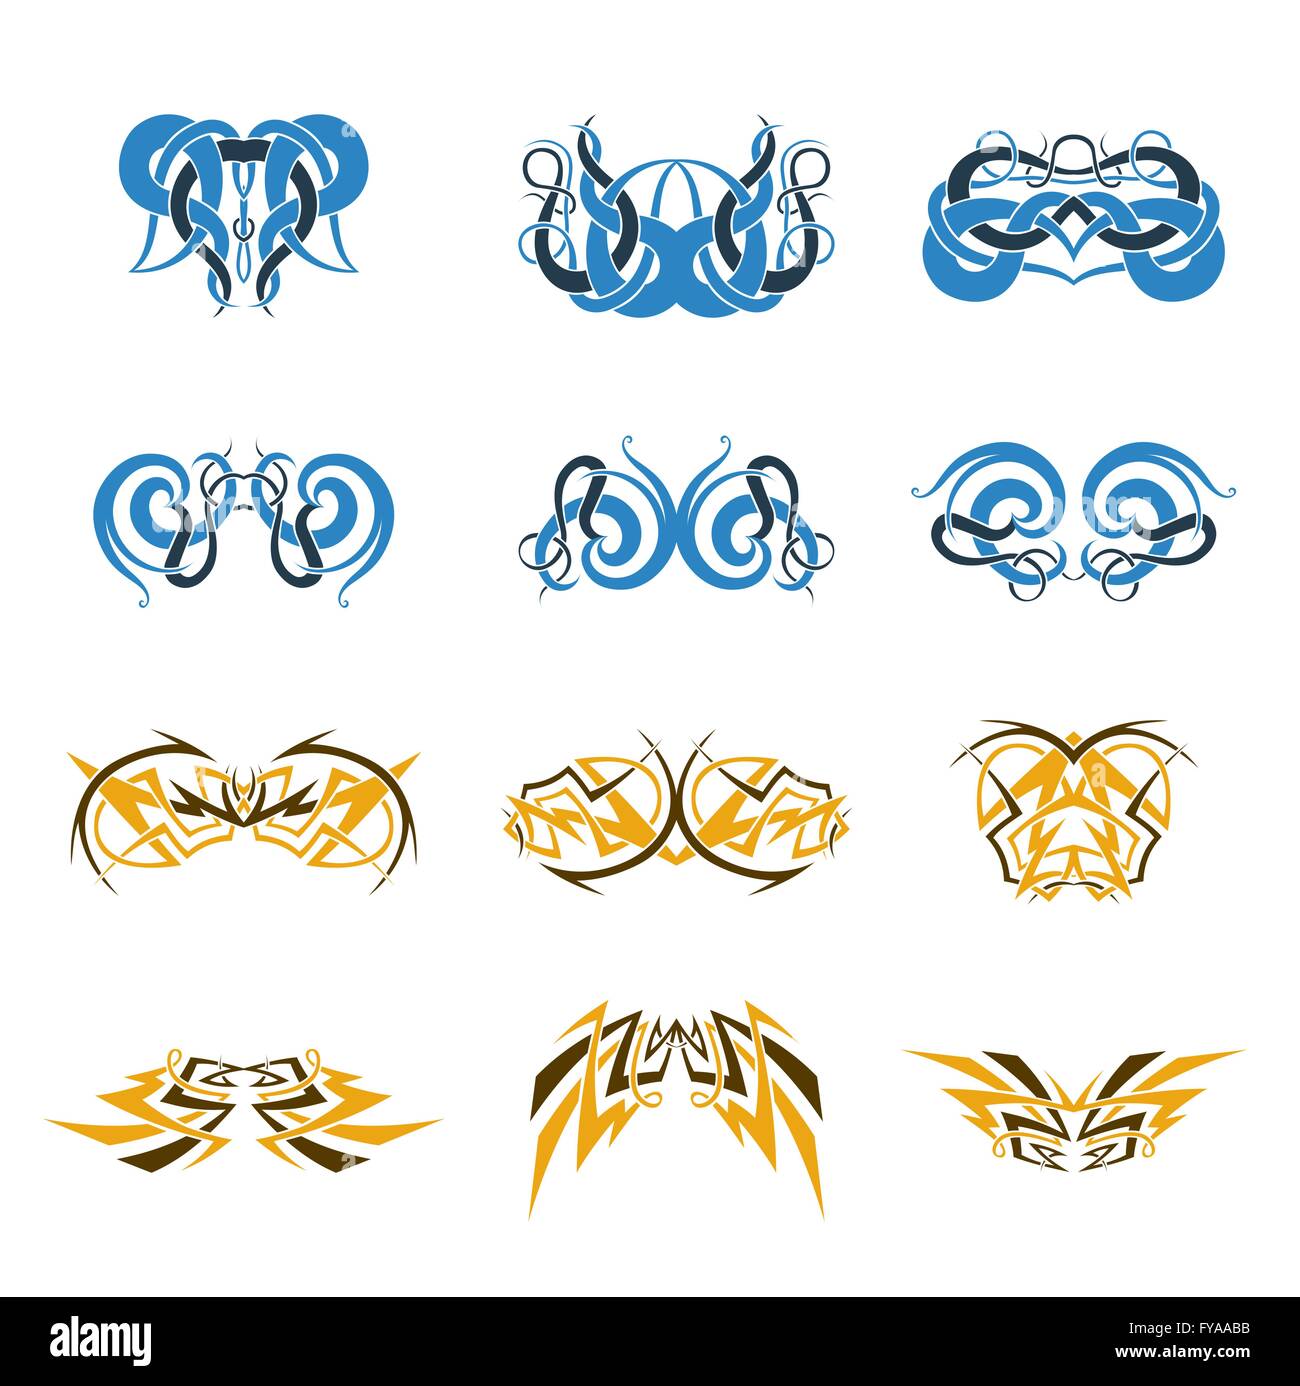 Vector design set of tribal tattoo art elements. These eye-catching graphic design ornamental resources are scalable, editable Stock Vector